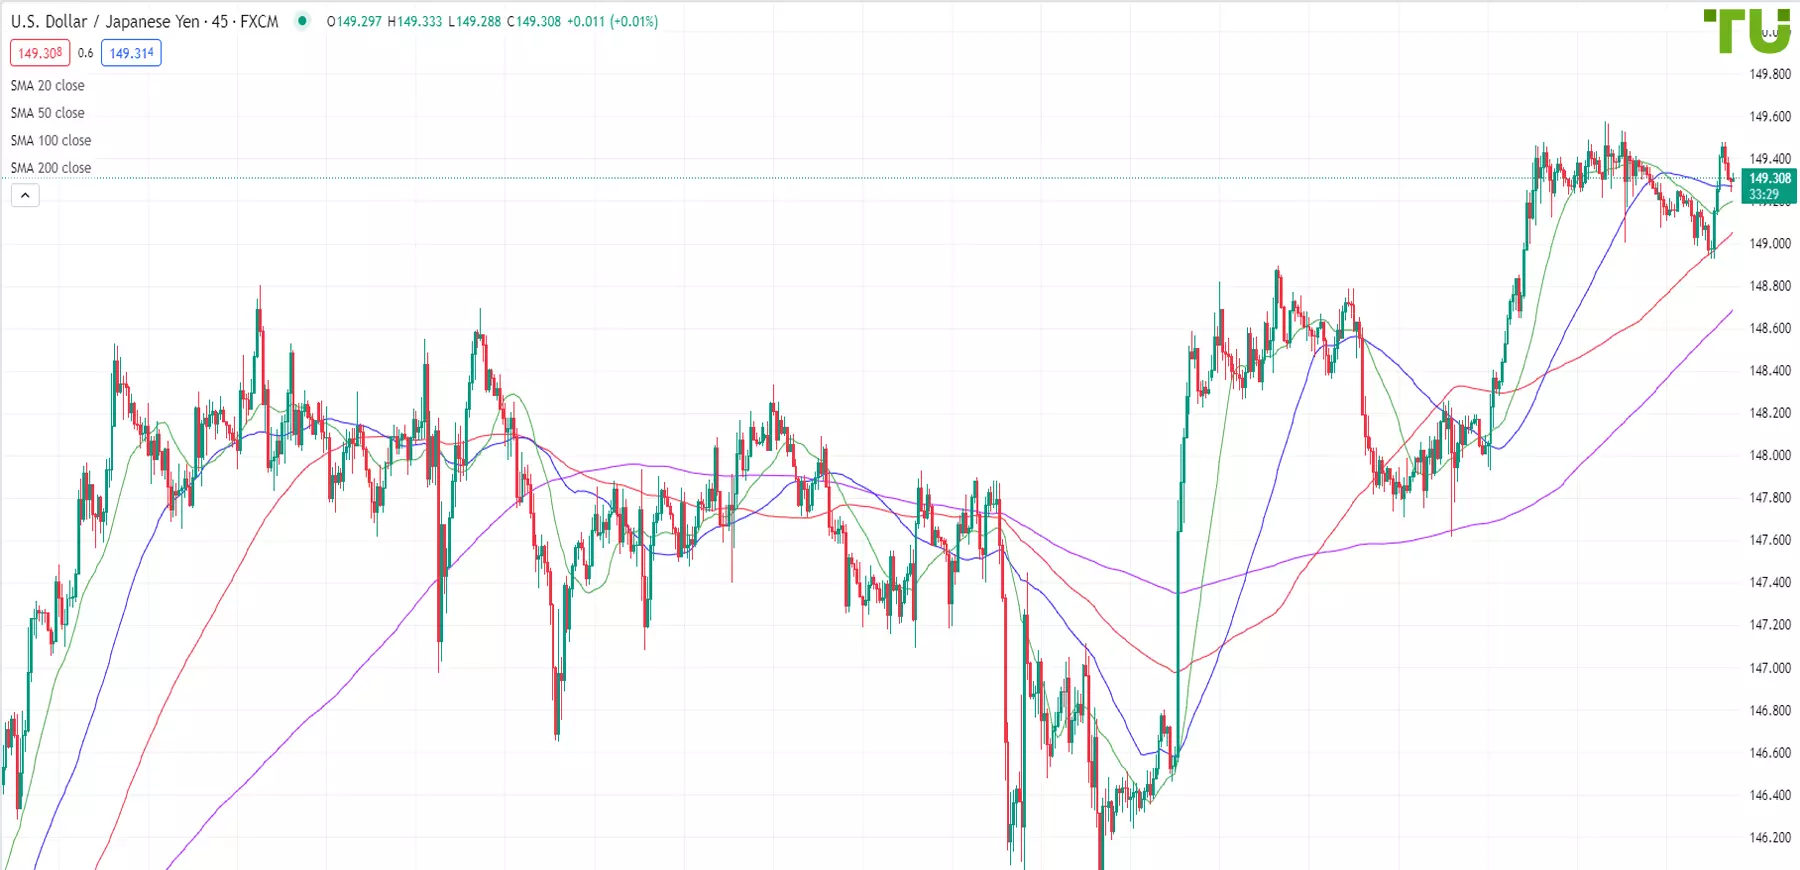 The JPY is falling against the USD, yet a correction is a possibility (Weekly Review)